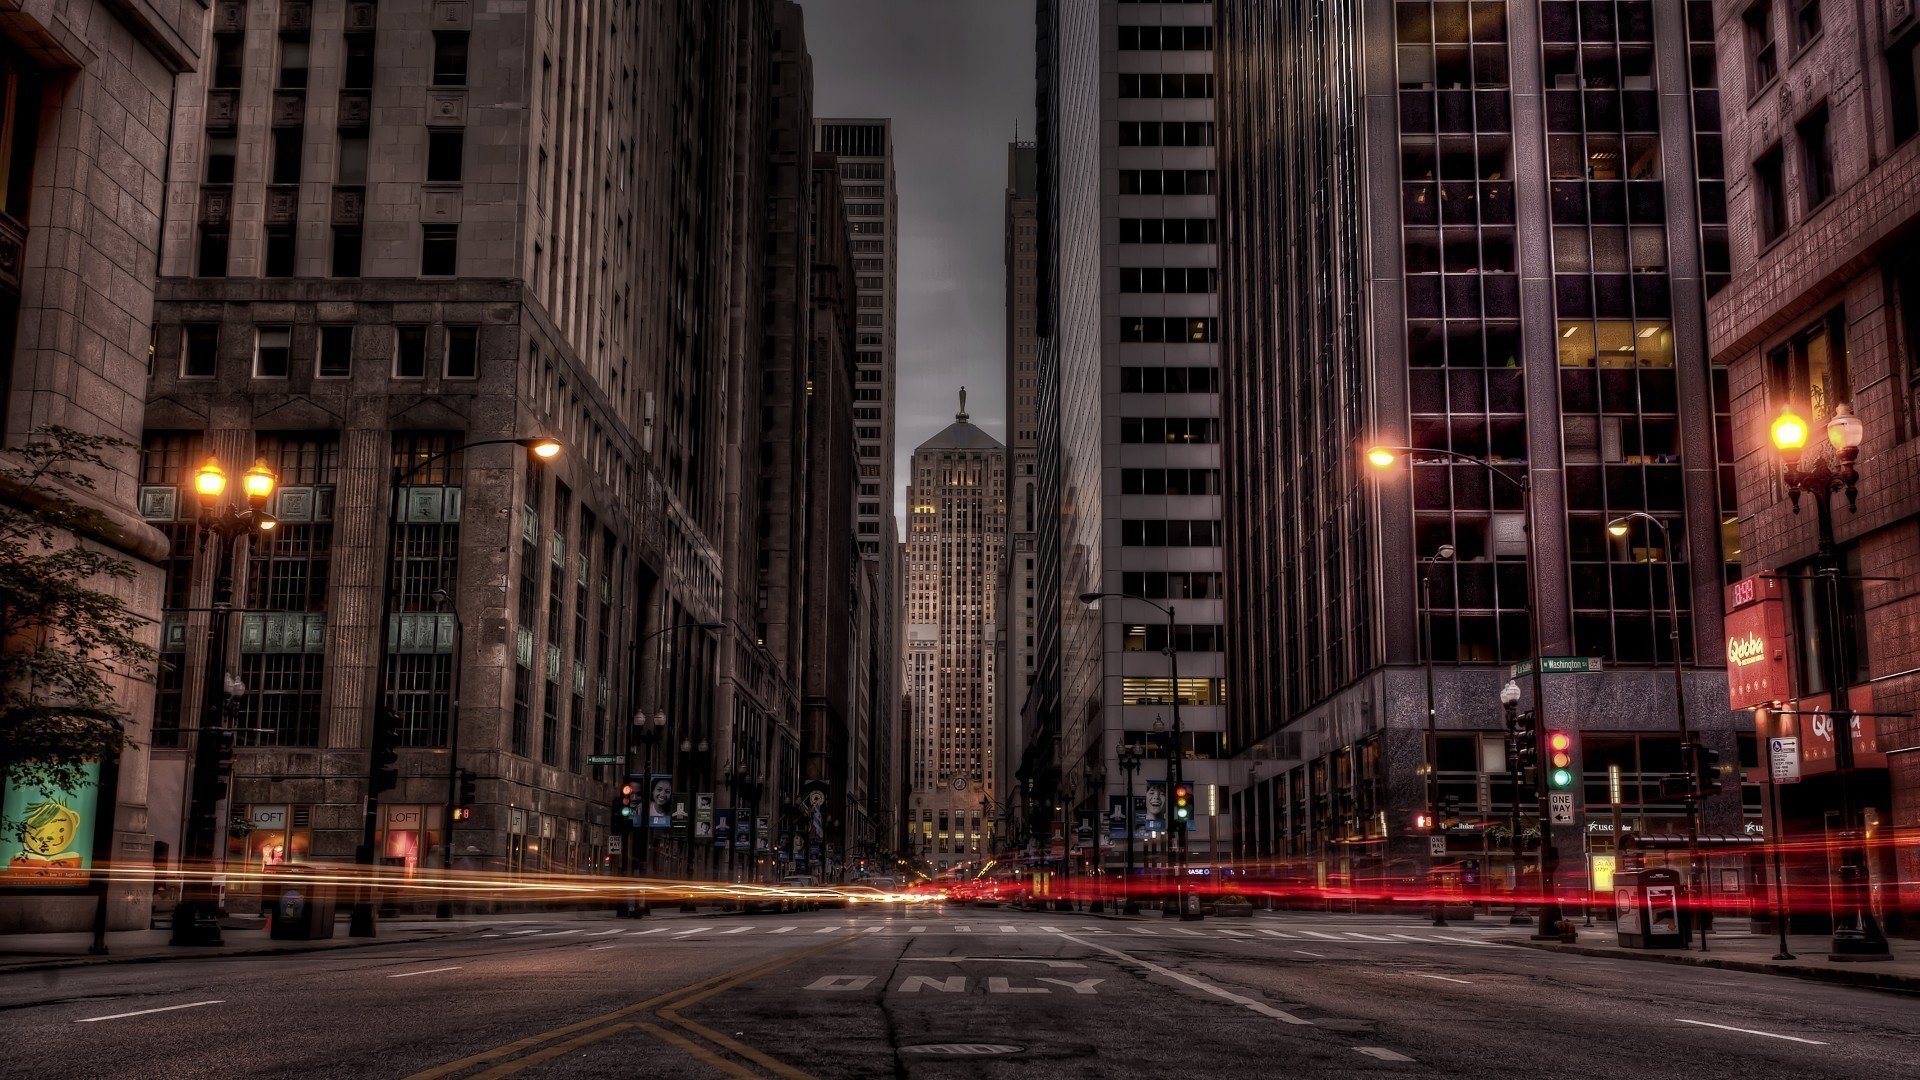 photography, City, Building, Street, Long exposure, HDR, Chicago, Light trails Wallpaper